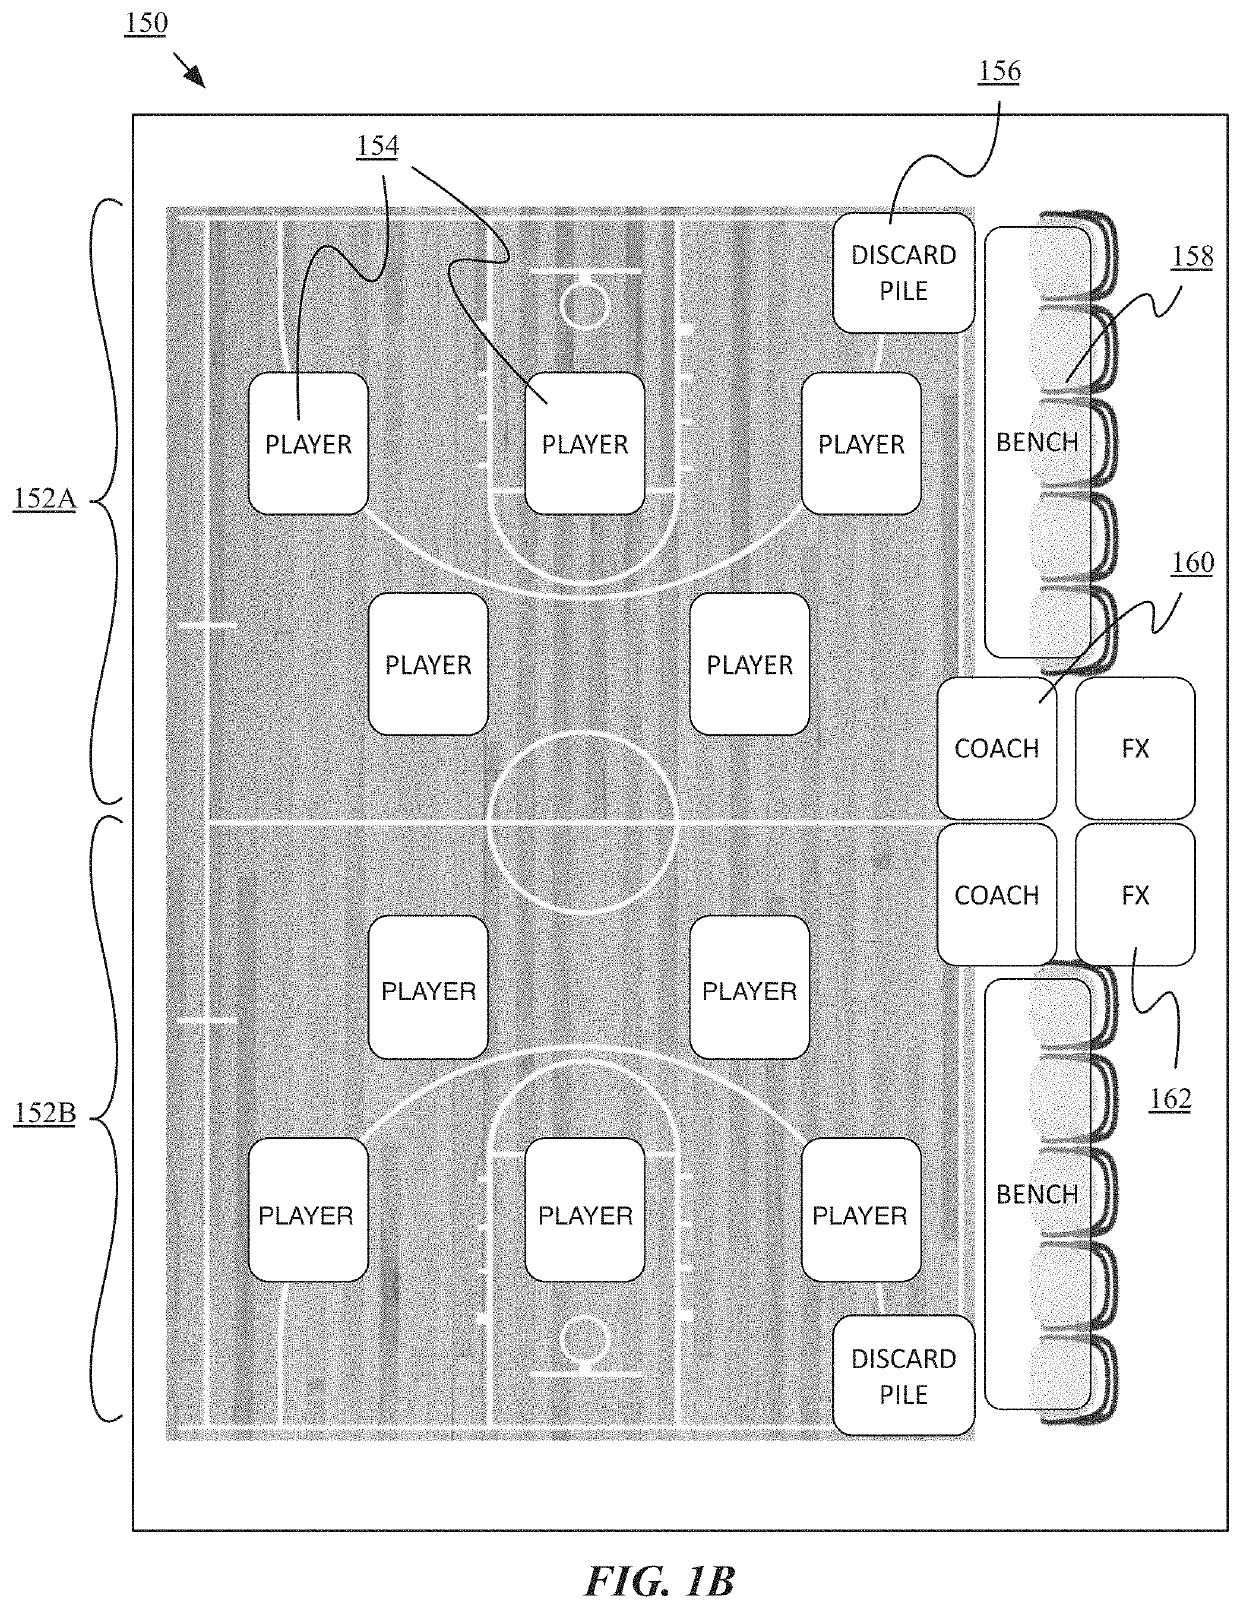 Sports-based card game systems and methods